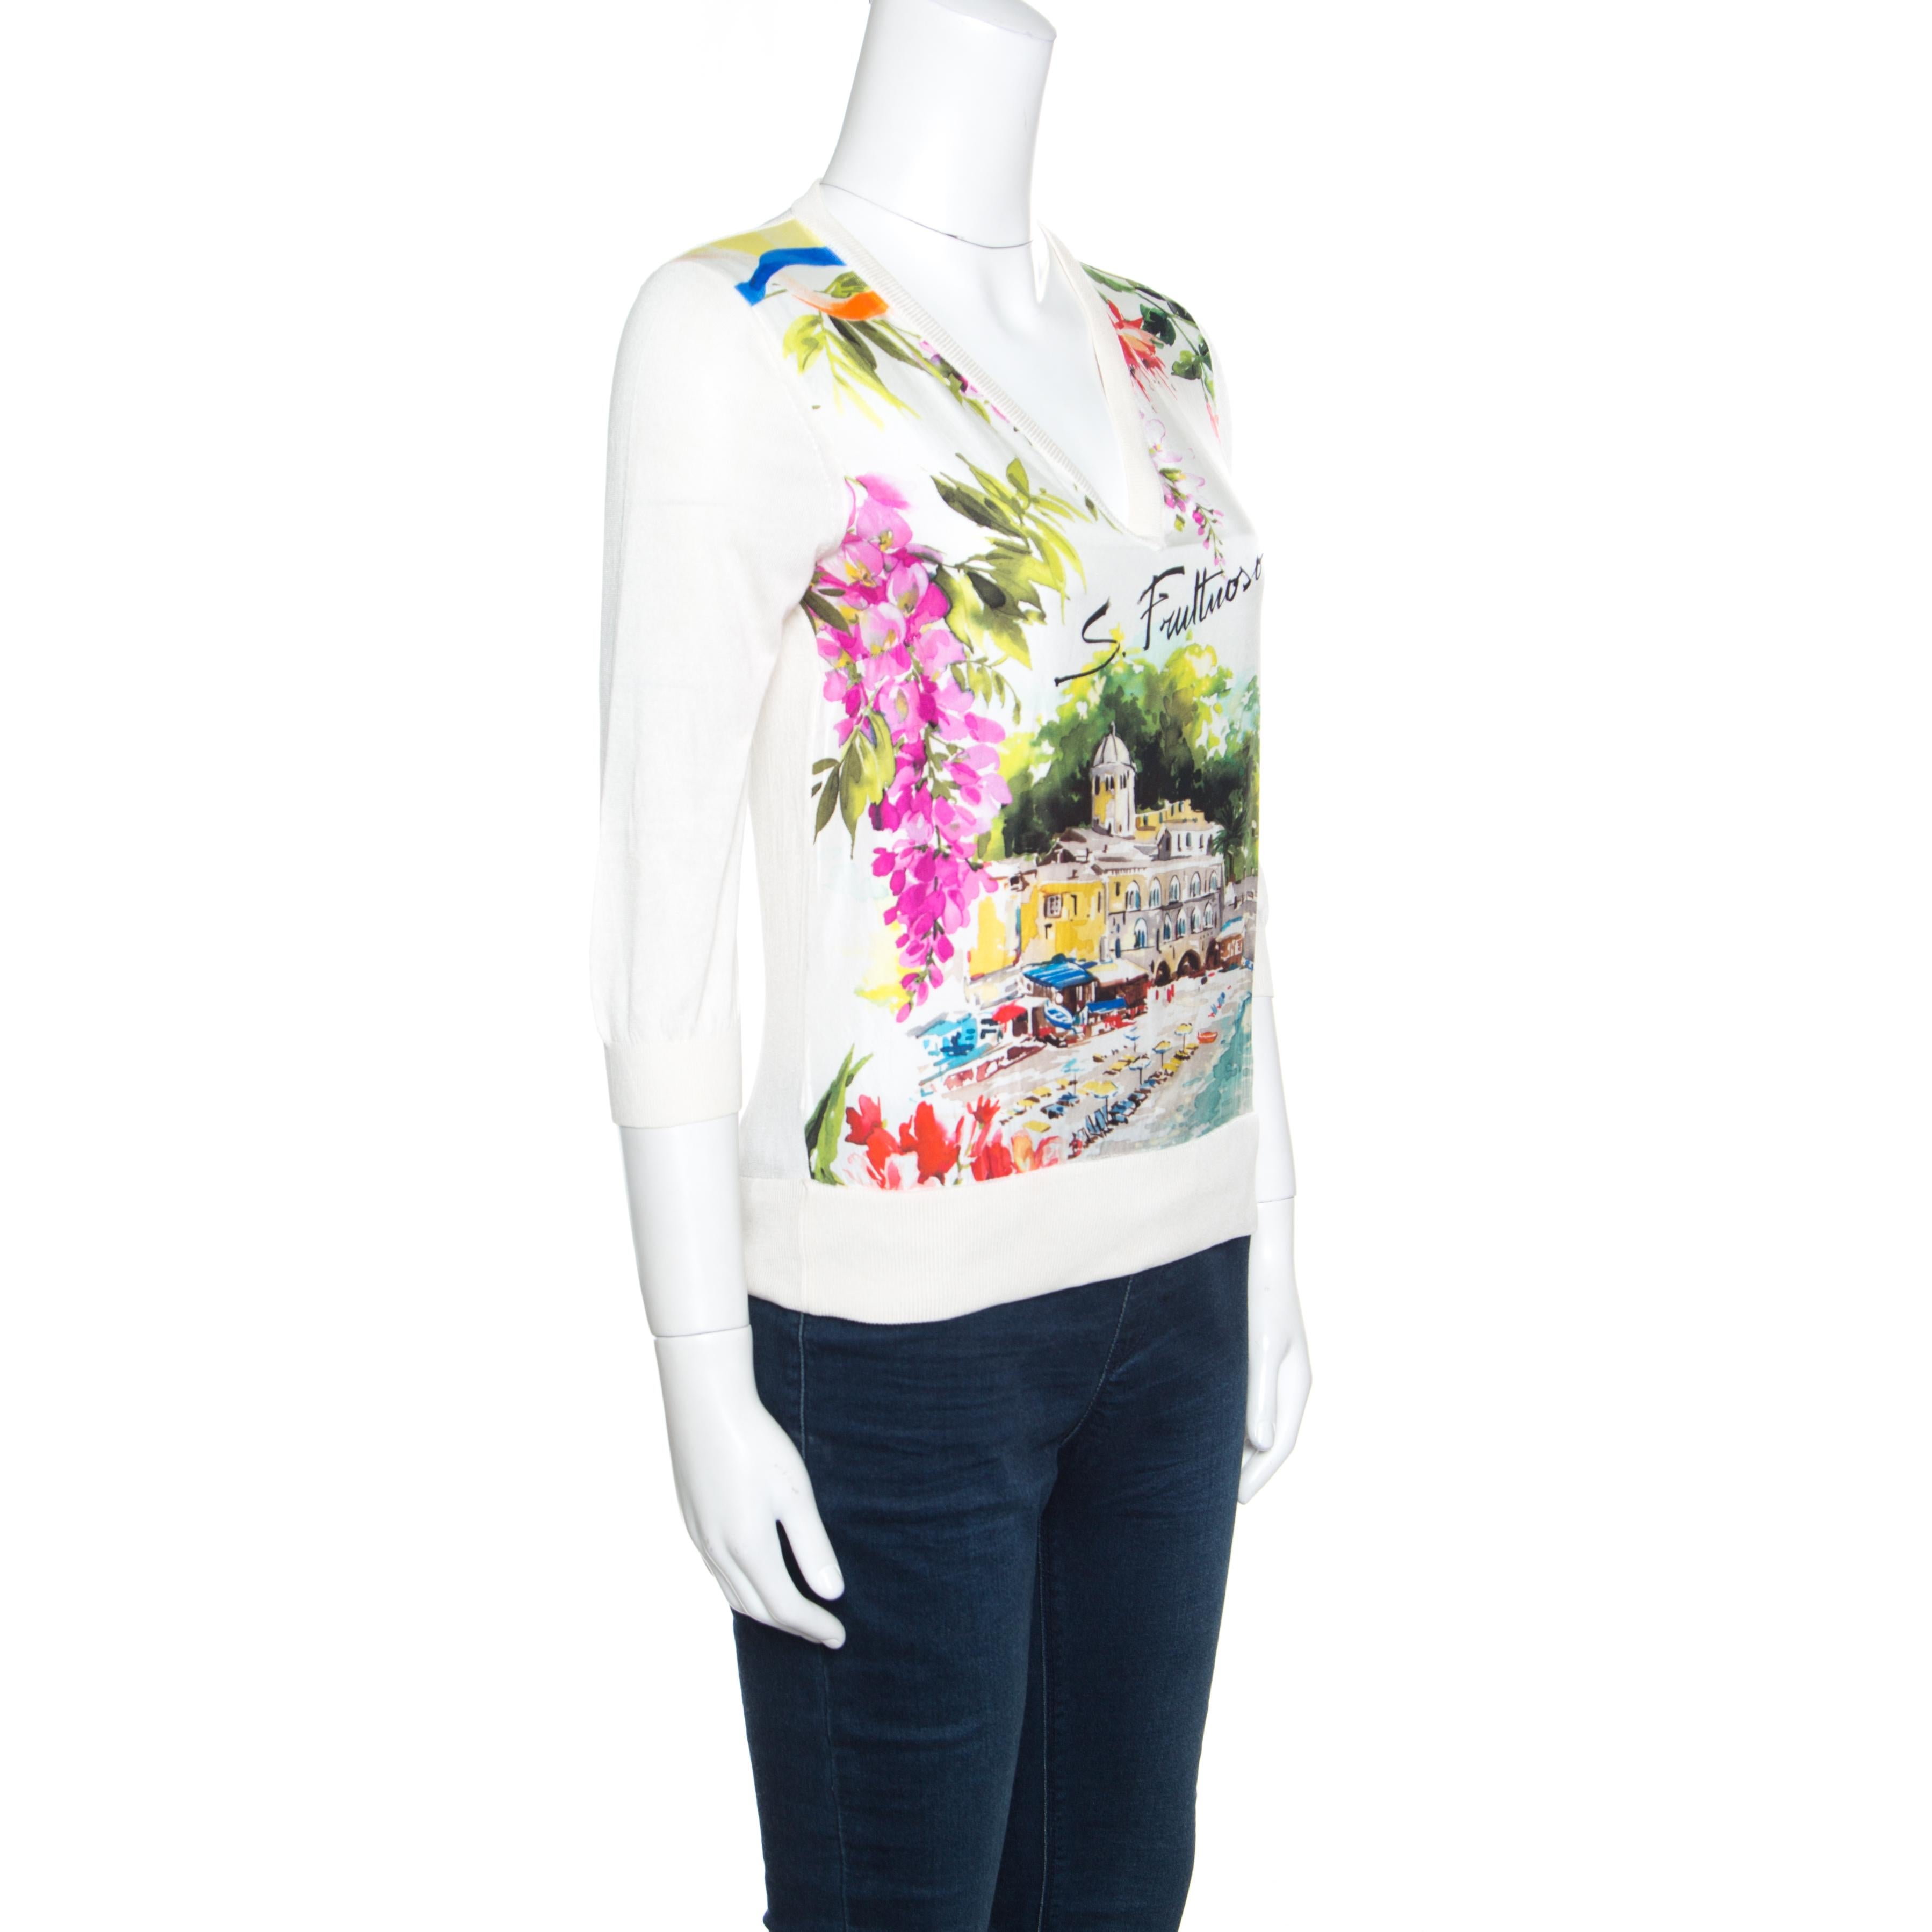 What a wonderful sight this sweater from Dolce&Gabbana brings! Made beautifully from silk, the sweater brings long sleeves, a V neck and Portofino print on the front. You can team it with high-waist pants, pumps and a Speedy bag.

Includes: